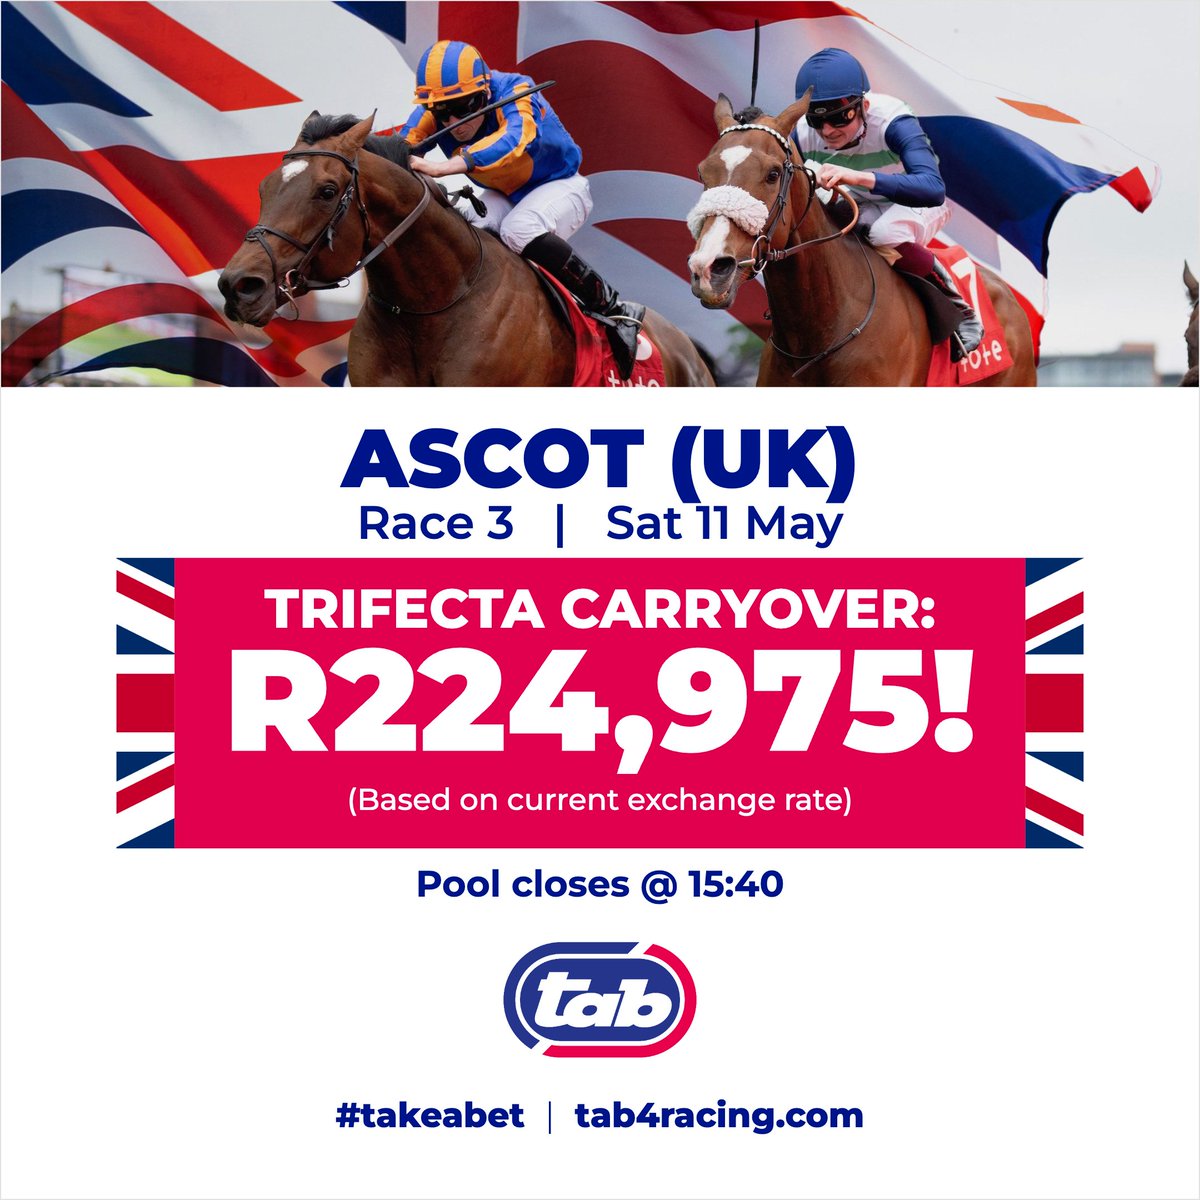 🏇🔥 Exciting news from Ascot UK! Race 3 features a trifecta carryover of R224,975! 🏆💰 This pool closes at 15:40 on Saturday – don't miss your chance to win big! 🕒💸 #AscotUK #HorseRacing #Trifecta #Carryover